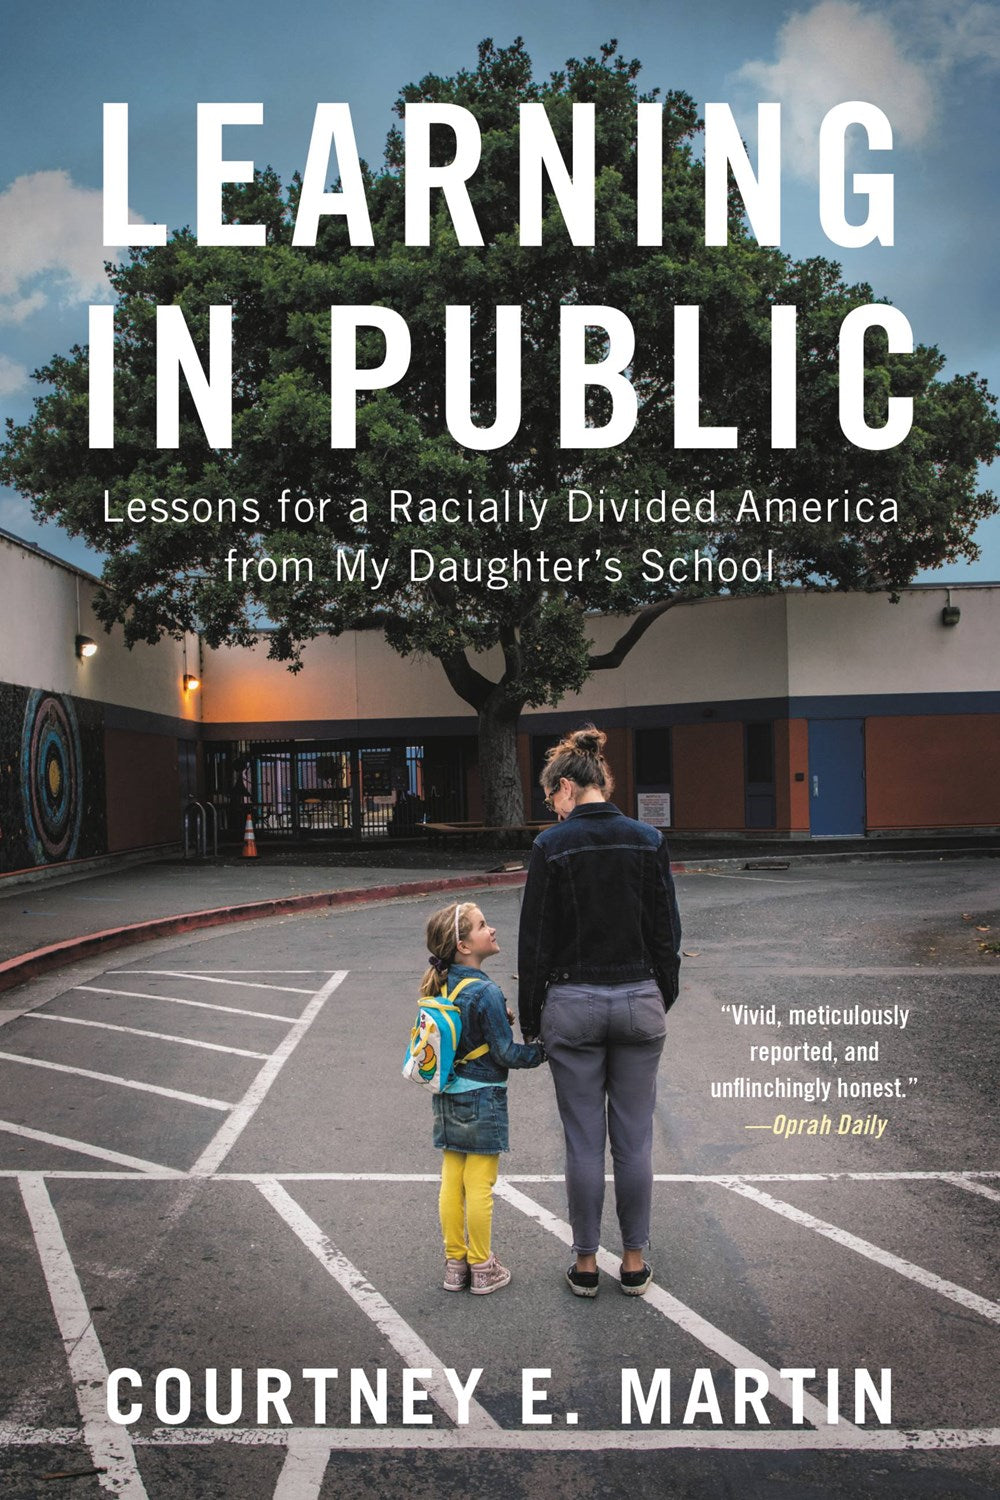 Learning in Public: Lessons for a Racially Divided America from My Daughter's School by Courtney E. Martin